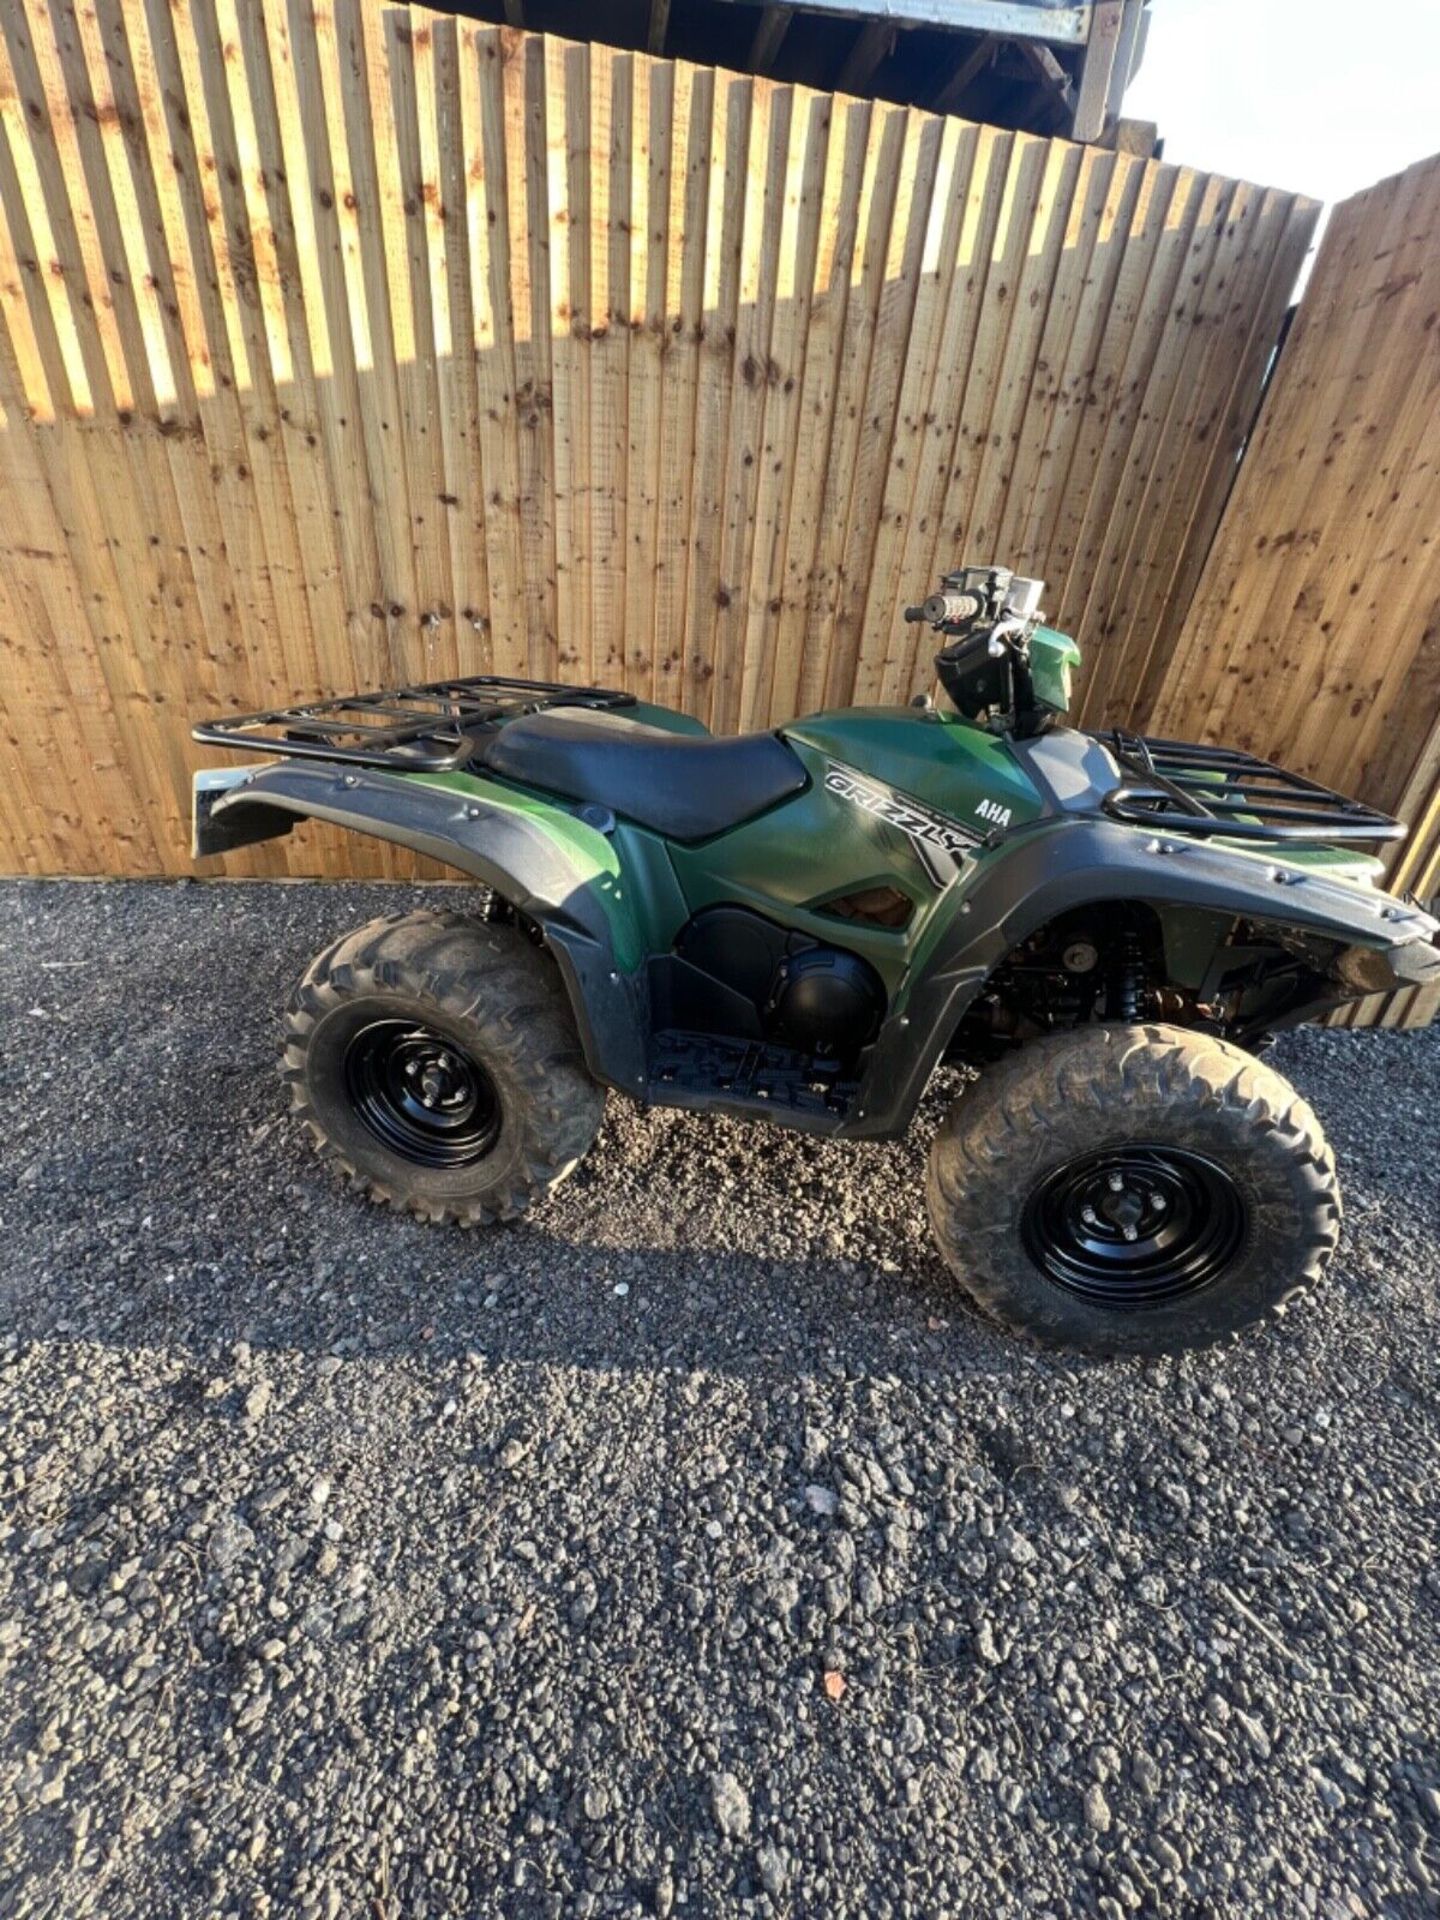 YAMAHA GRIZZLY 700 1300 HOURS FROM NEW 4X4 ROAD LEGAL FARM QUAD BIKE ATV - Image 6 of 13